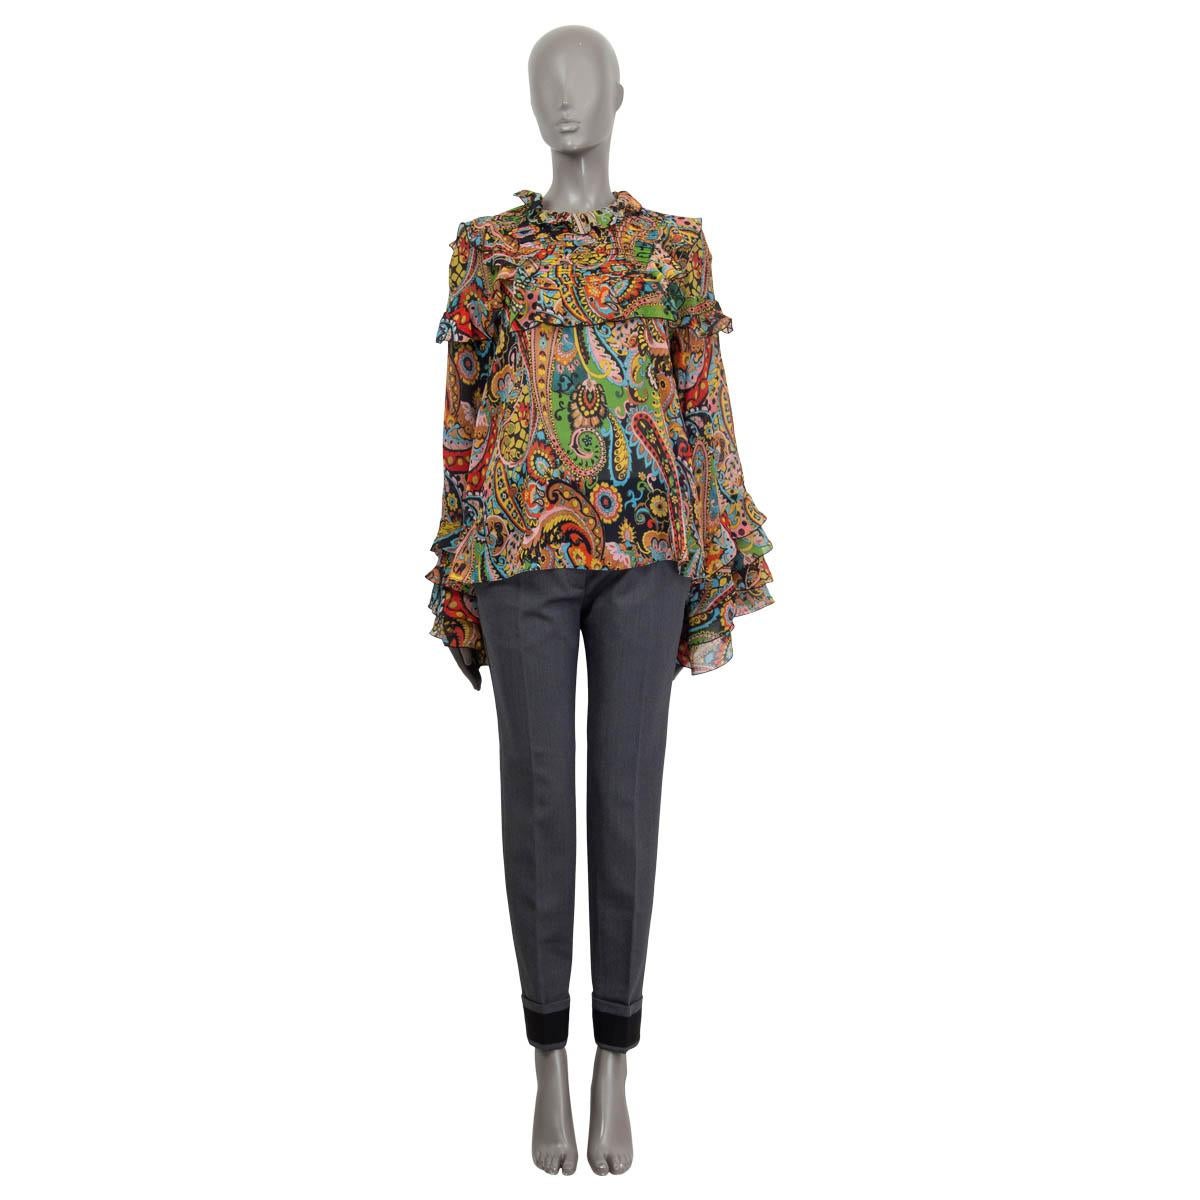 100% authentic Etro Fall/Winter 2021 'California' semi sheer blouse in green, pink, blue, red, yellow and back silk (100%). Features flared cuffs, ruffled details and a paisley print. Opens with a button on the back. Unlined. Has been worn and is in